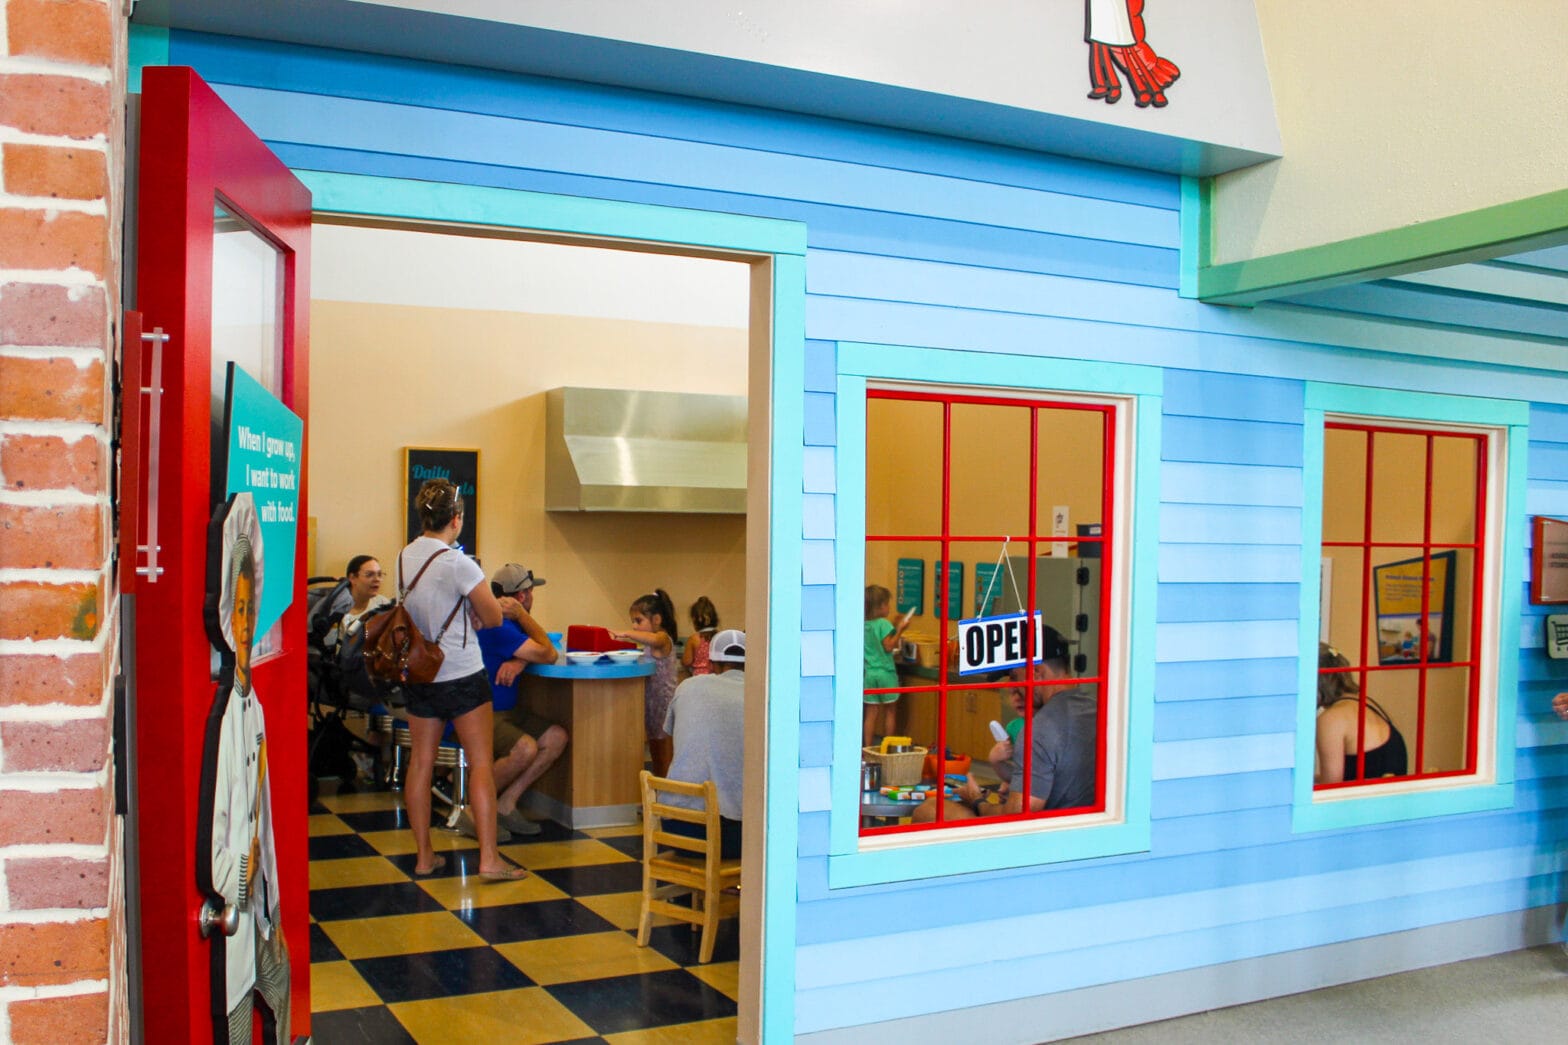 An overview of the door entrance to the toy cafe.